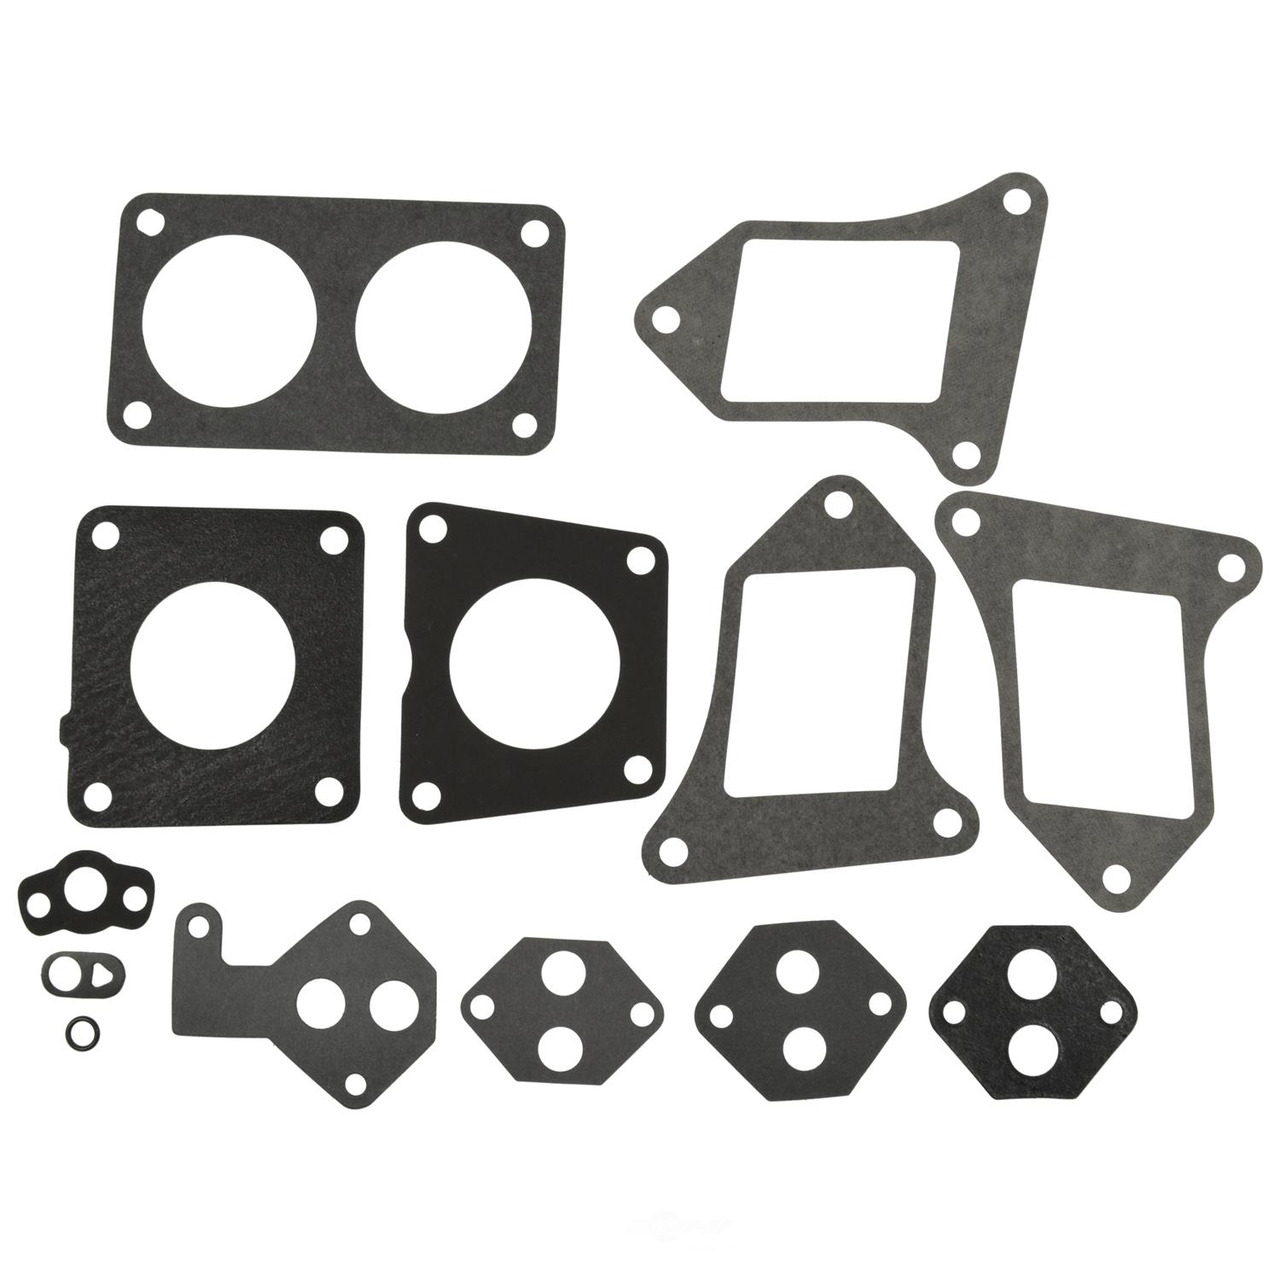 Standard Motor Products 2006 Fuel Injection Throttle Body Mounting Gasket  Set